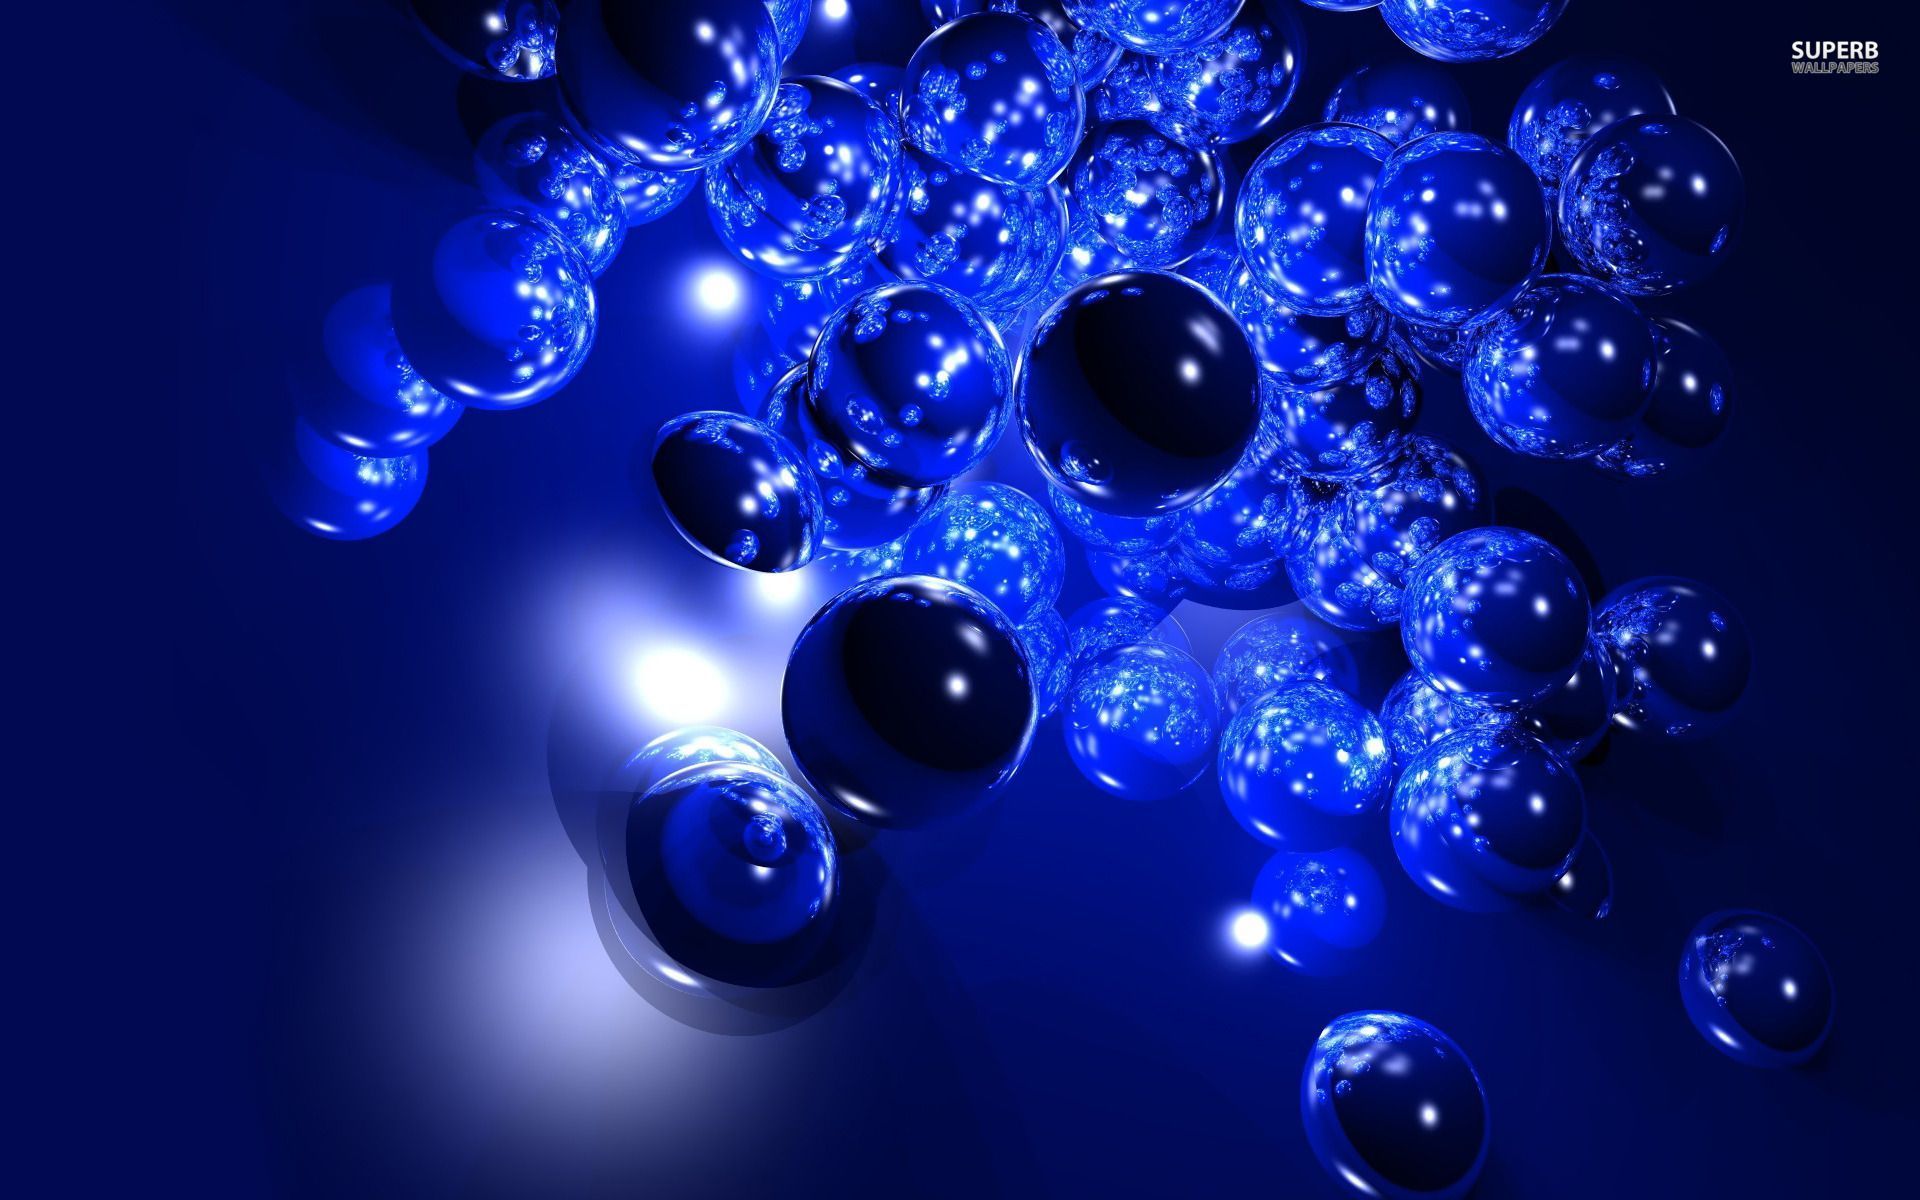 Bubbles wallpaper - Abstract wallpapers - #20111